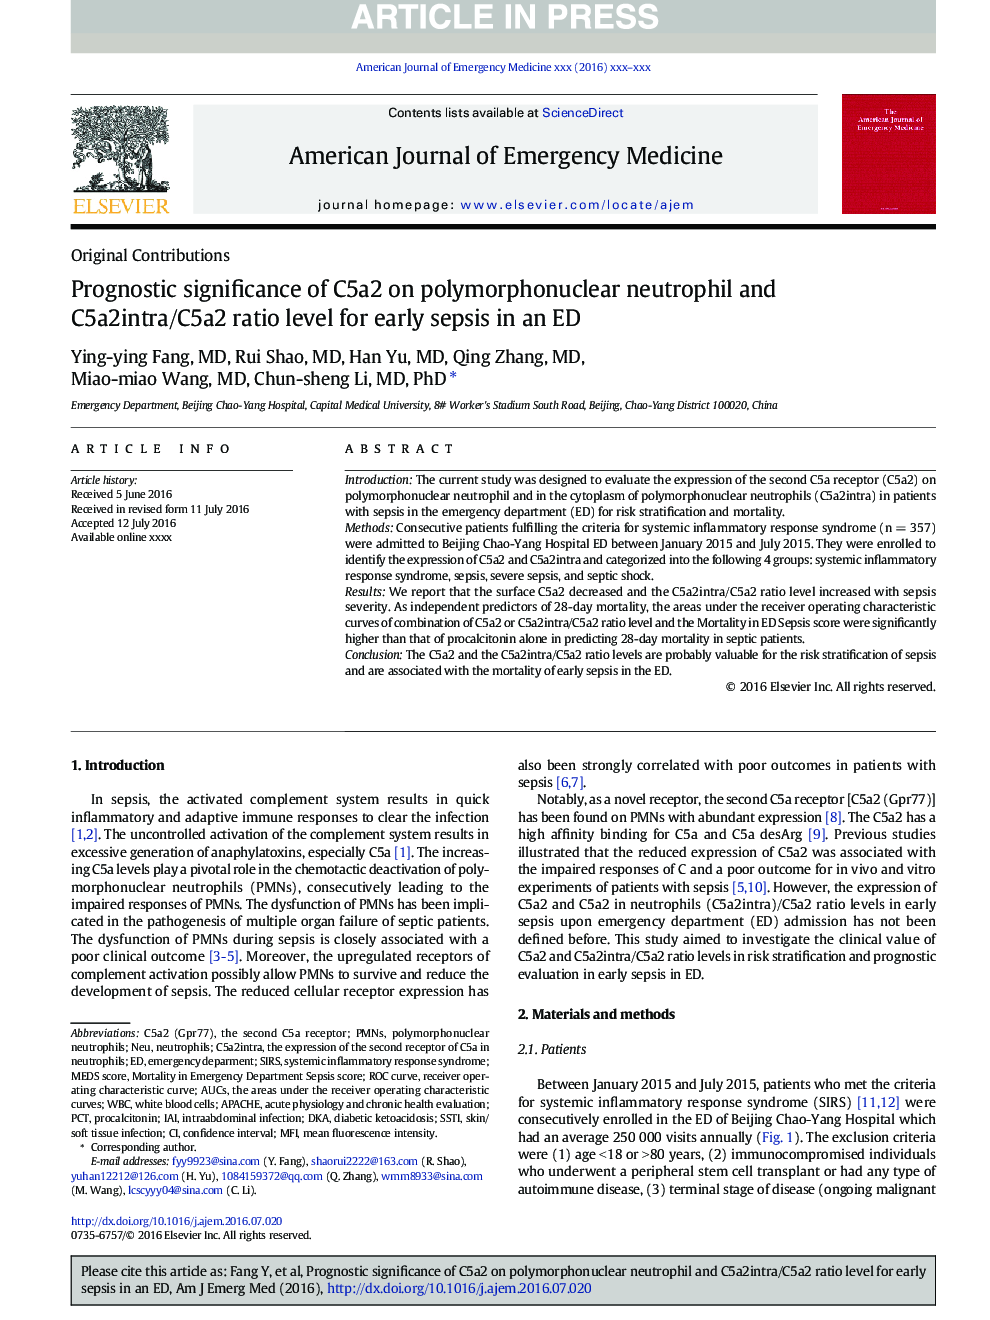 Prognostic significance of C5a2 on polymorphonuclear neutrophil and C5a2intra/C5a2 ratio level for early sepsis in an ED